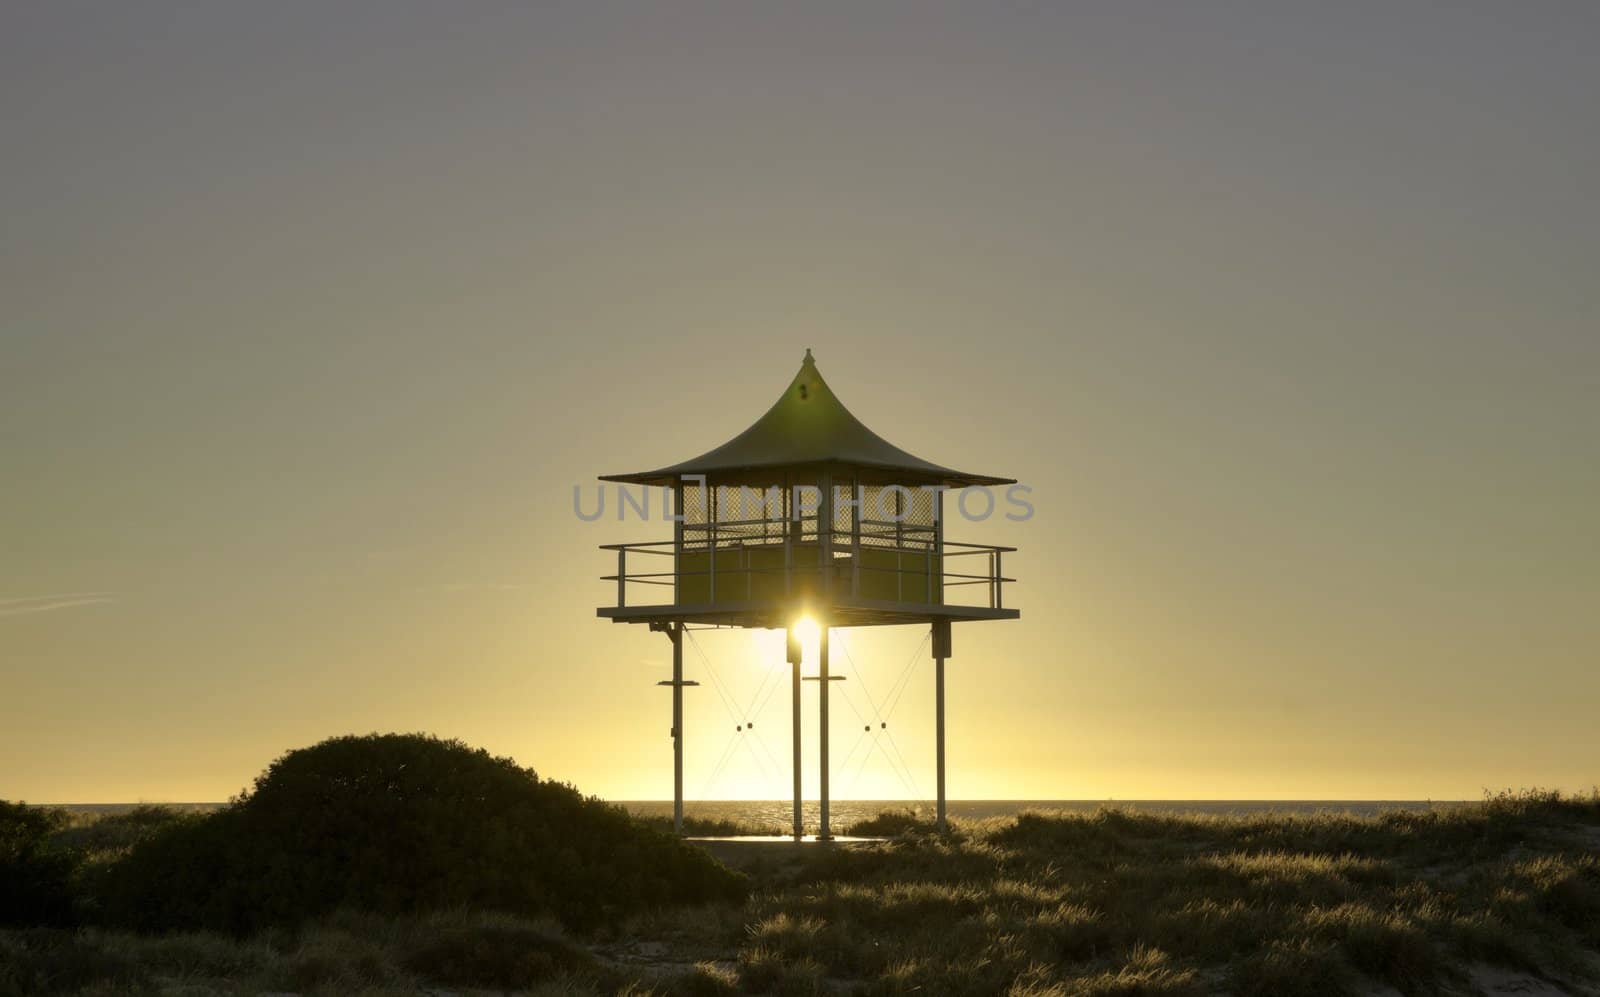 sunset behind surf life savers rescue lookout station